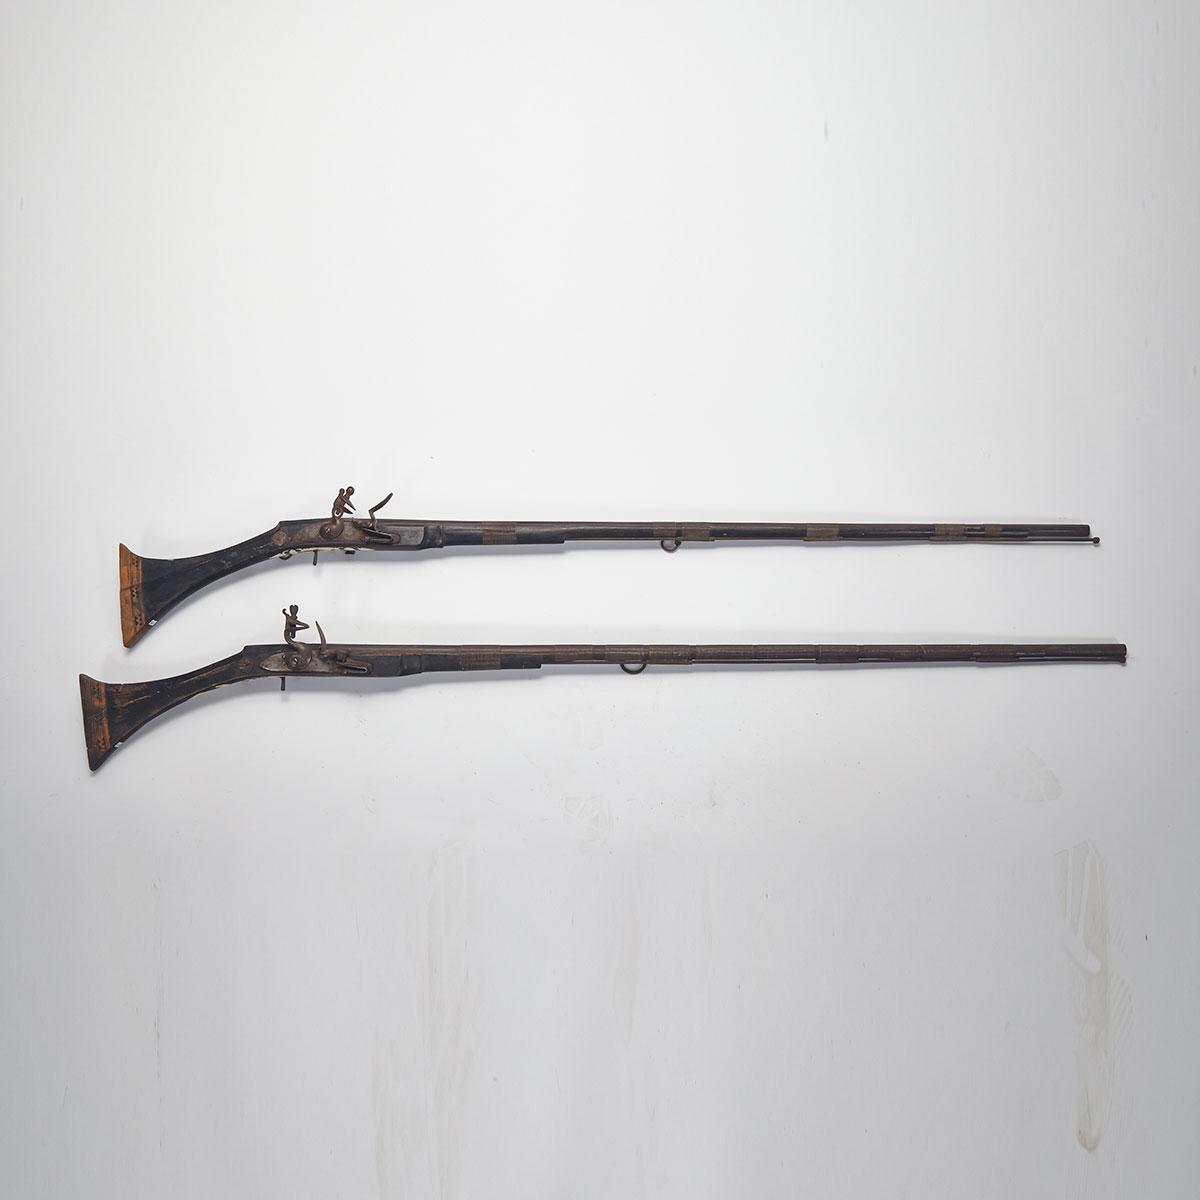 Two North African Flintlock Muskets, 19th century